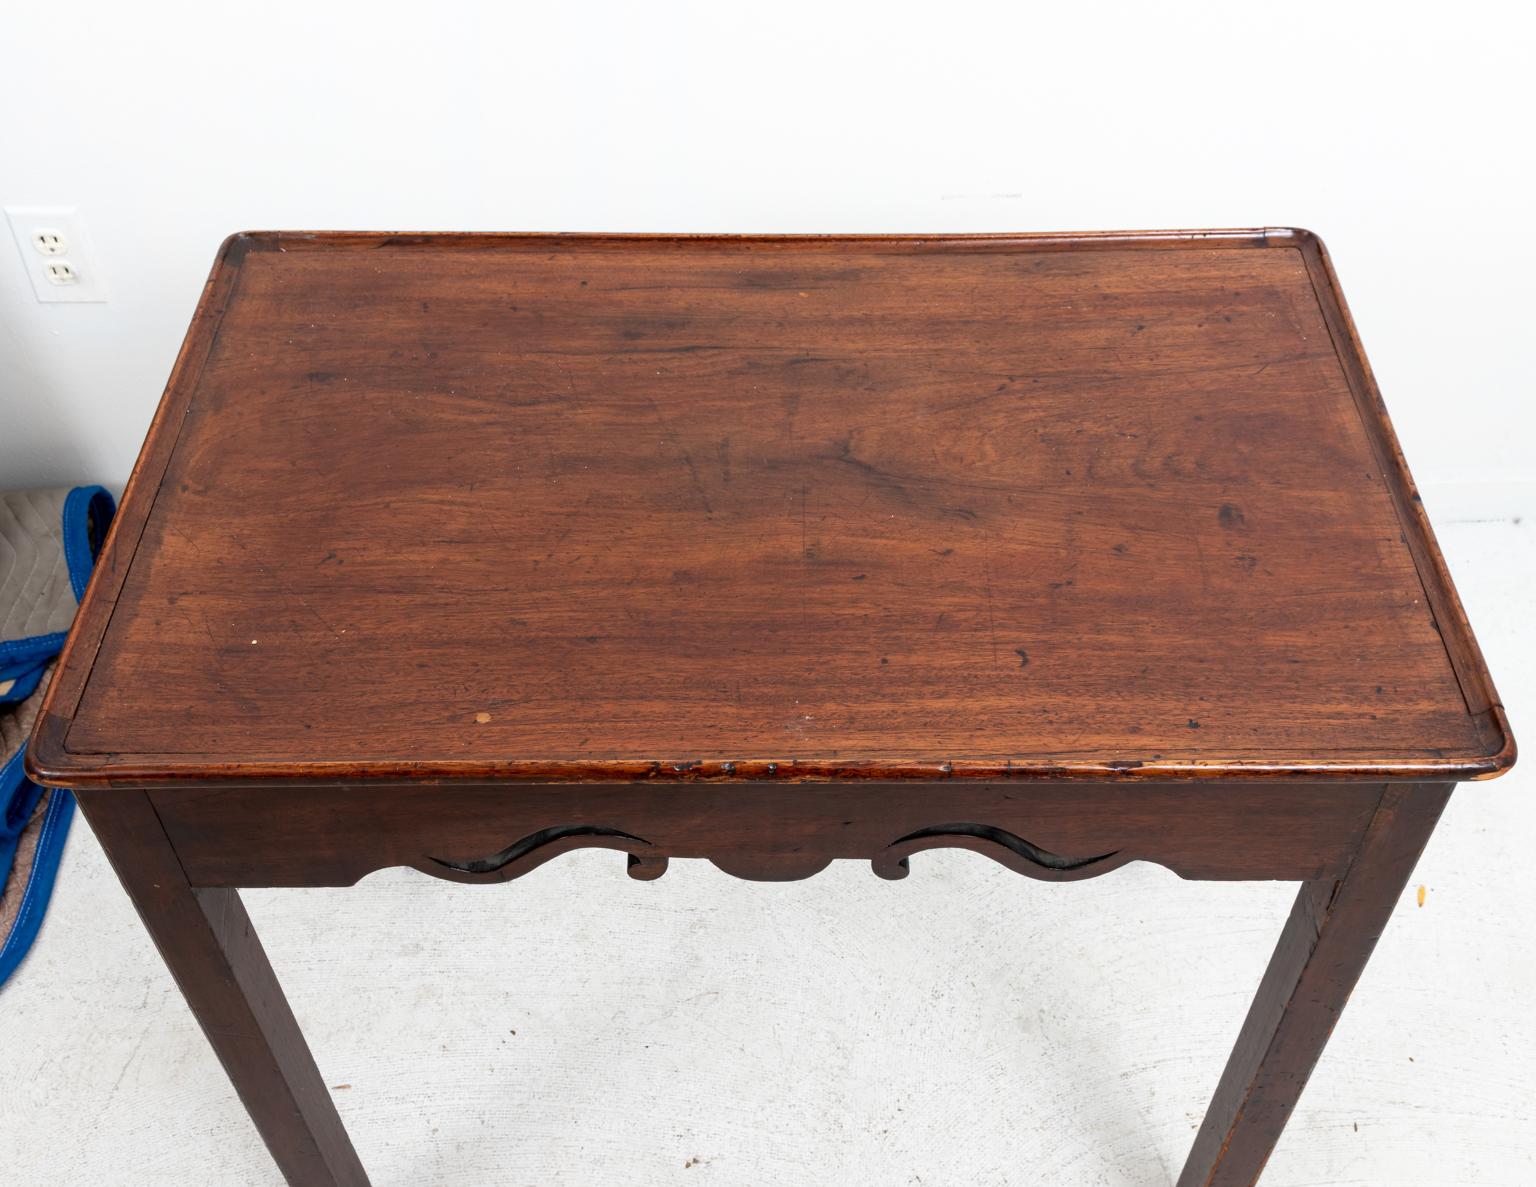 English tea table in Mahogany, circa 1810s. The piece is in the Chippendale style with pierced, carved apon and tray top resting on four straight square turned legs. Made in England. Please note of wear consistent with age including slight